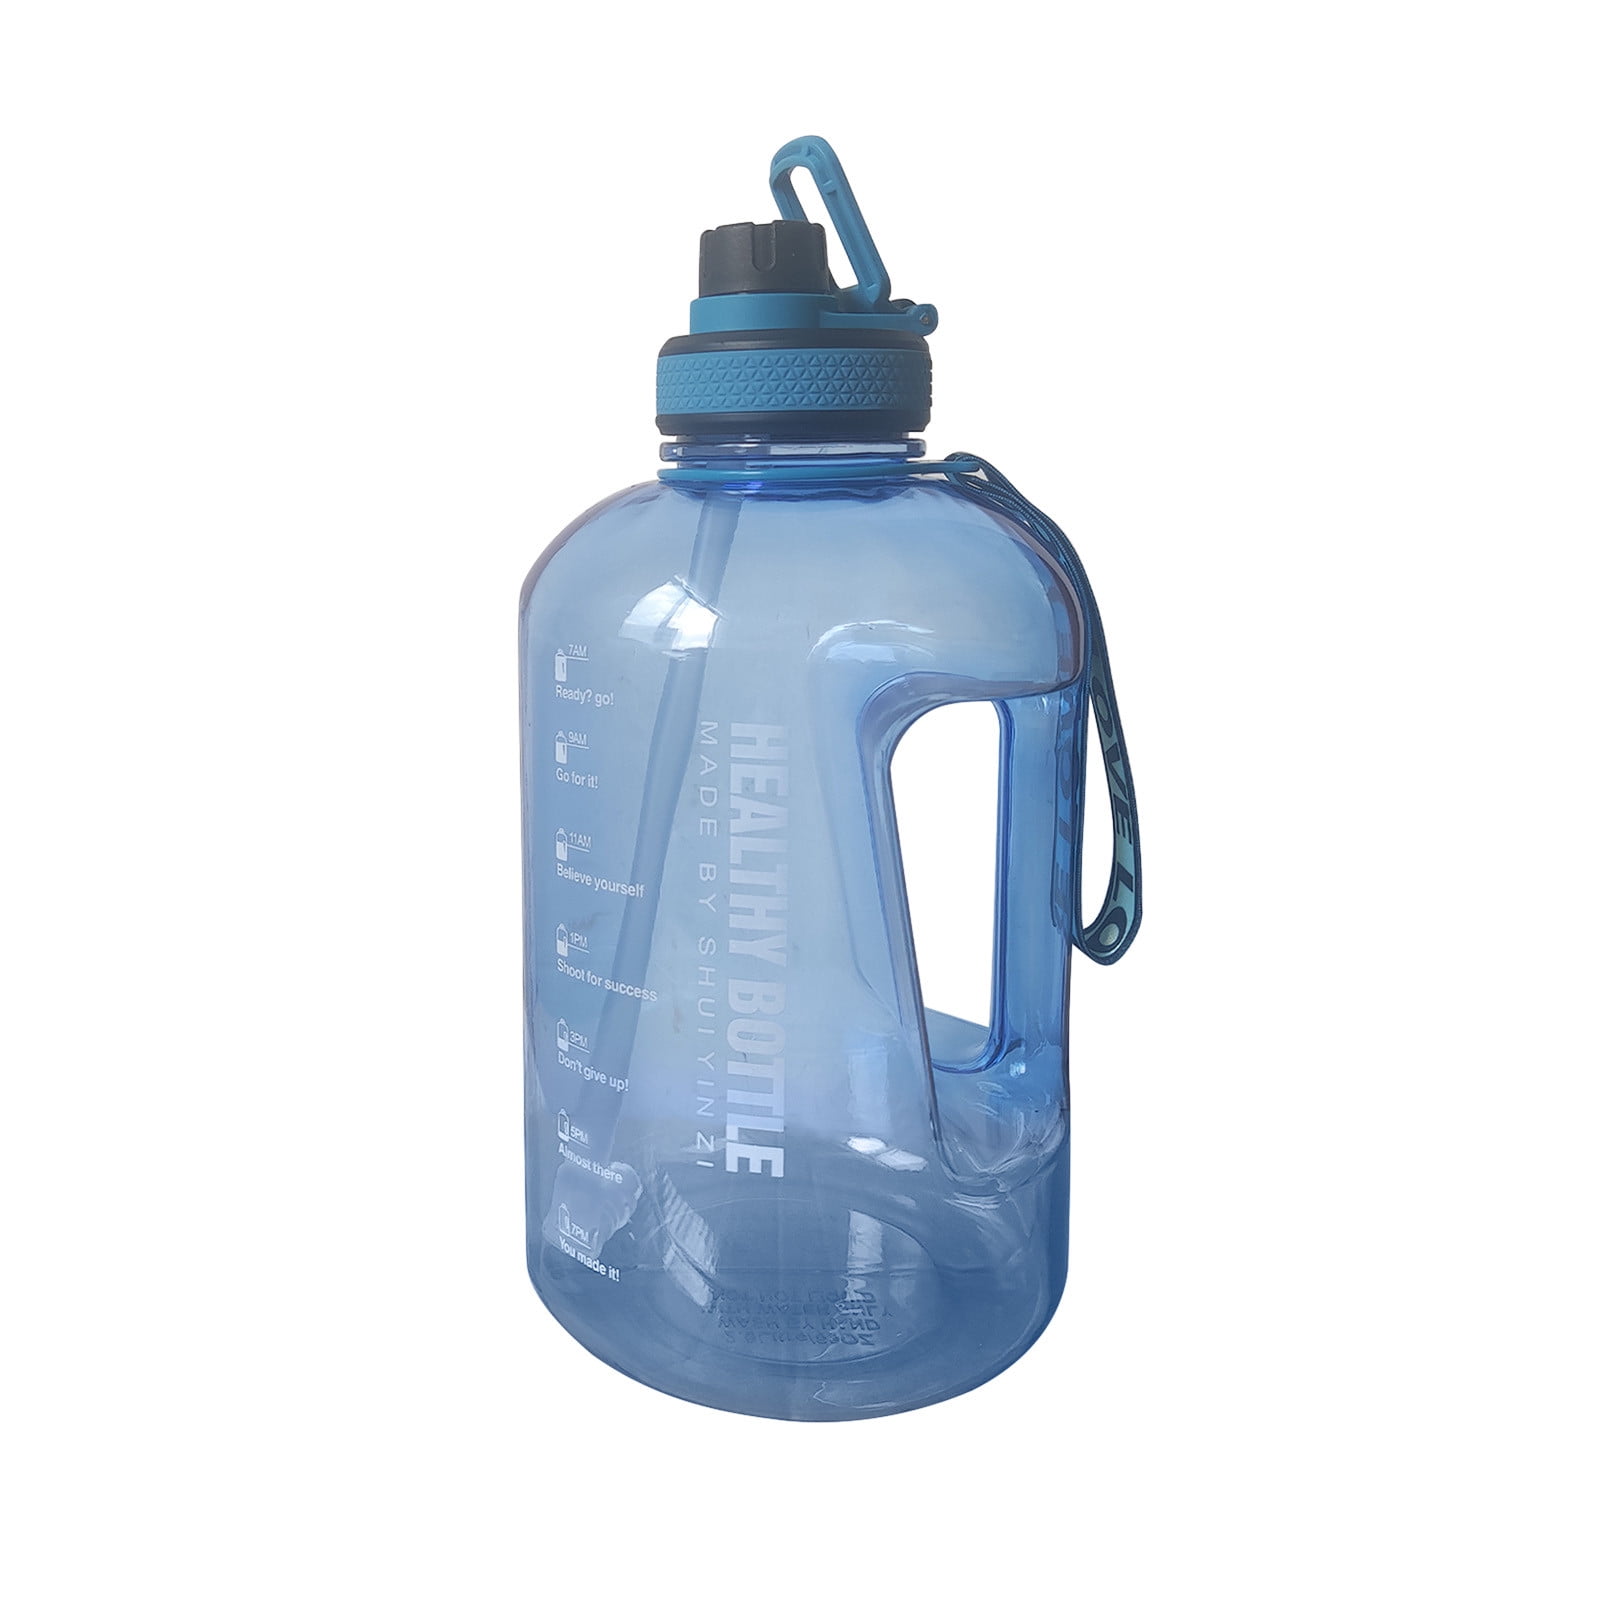 Odomy 2L Extra Large Plastic Motivational Water Bottle with Handle & Removable Straw Water Jug to Ensure You Drink Enough Water Daily, Purple